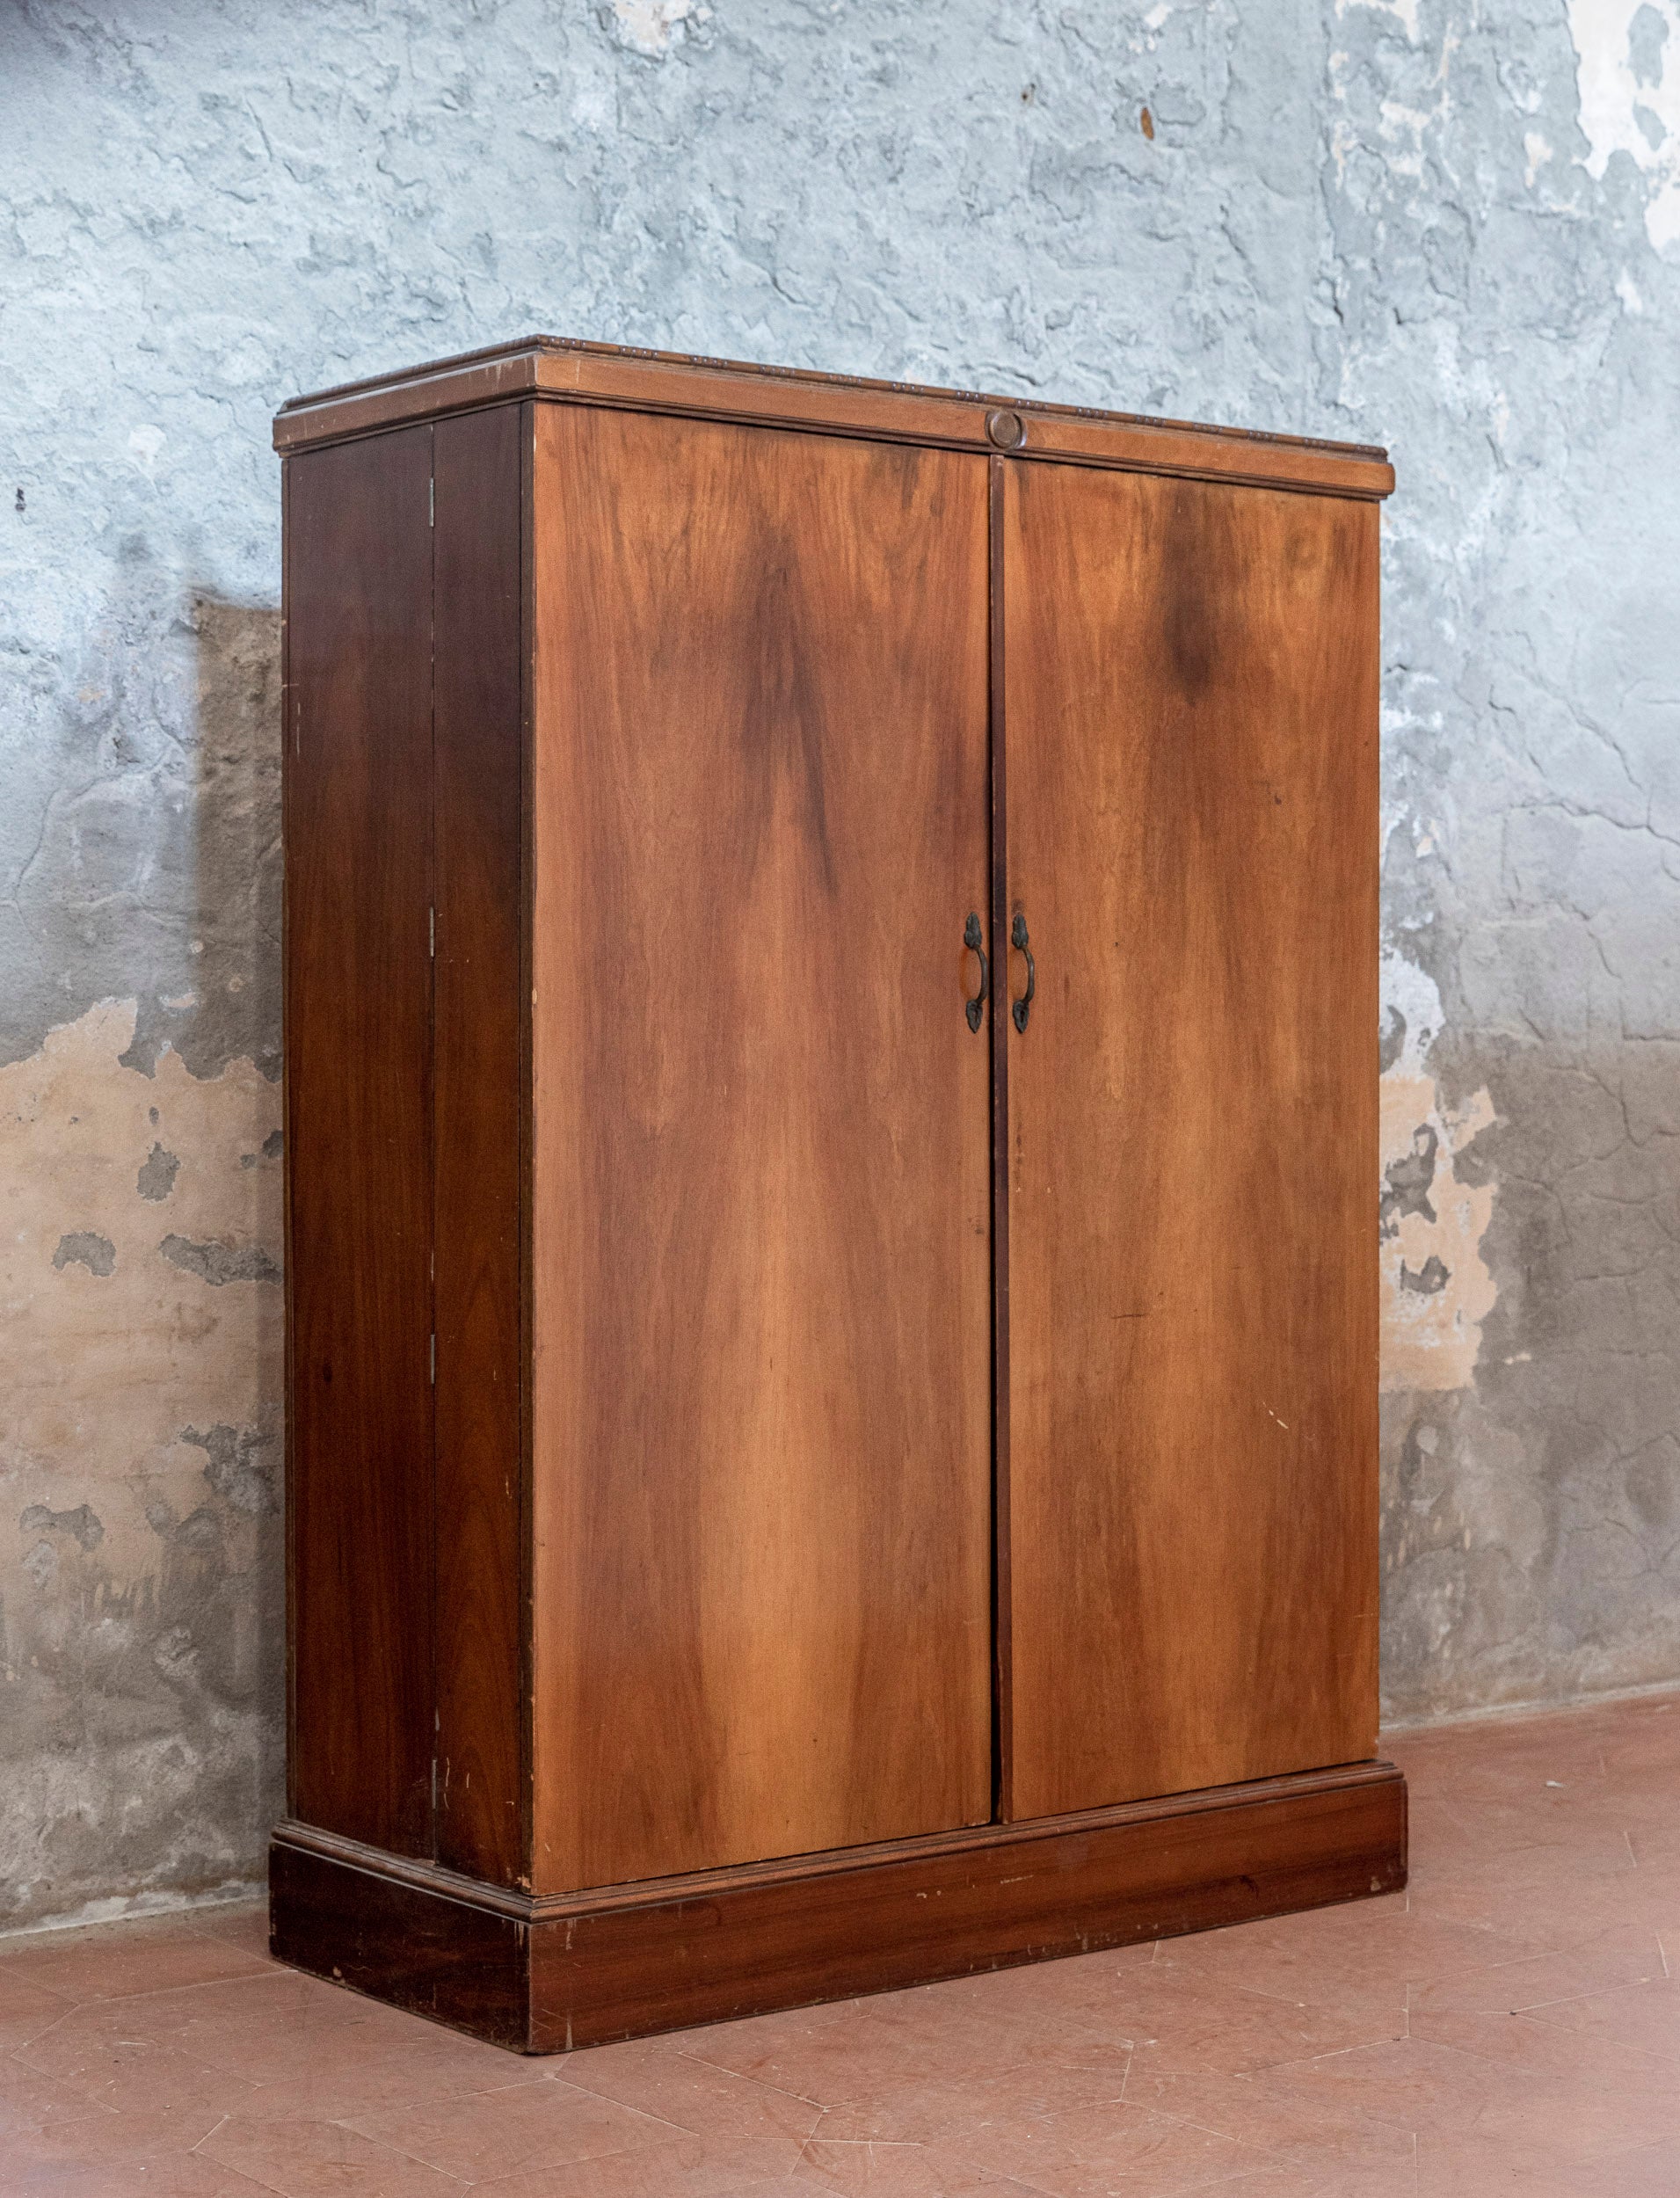 Elegant oak wood wardrobe by Compactom 
The two doors wardrobe has several compartments and shelves inside the right side while on the left side there is a coat hanger with its original wooden hangers and two compartments at the top. 
Excellent